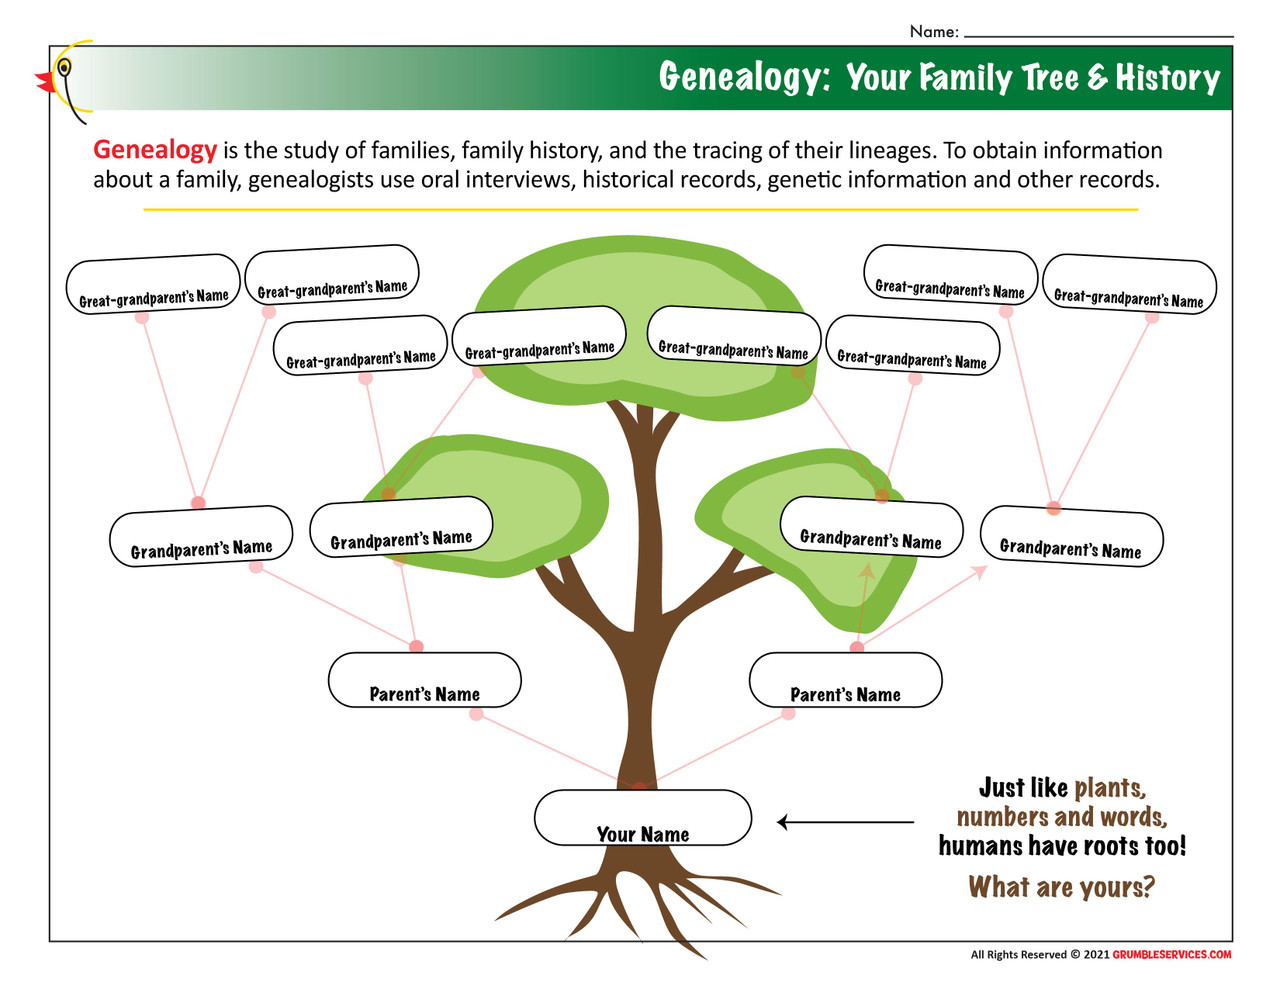 Genealogy synonyms - 376 Words and Phrases for Genealogy